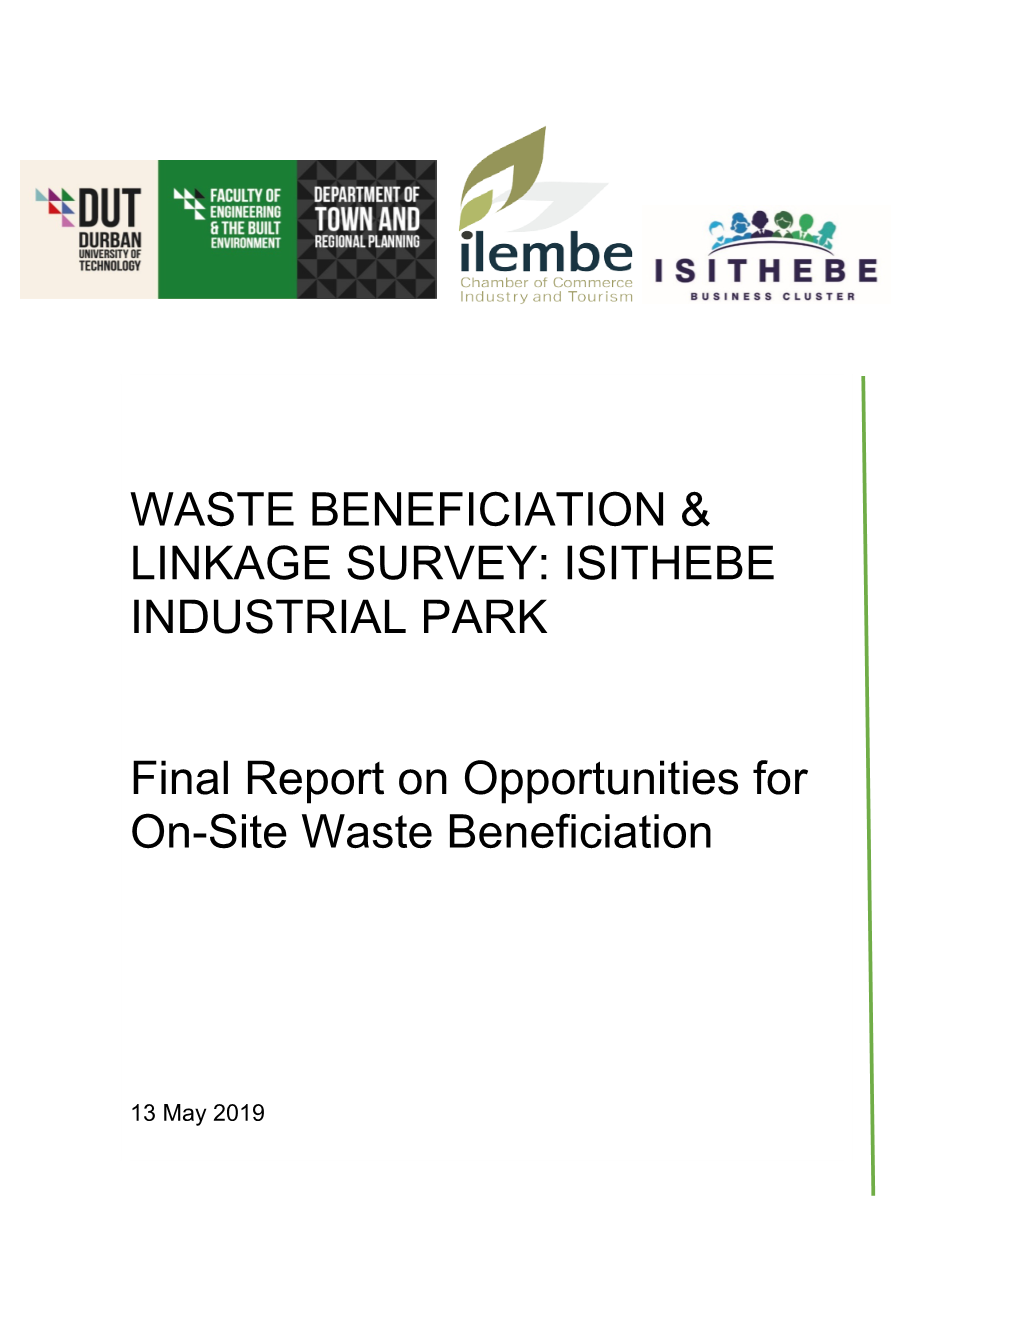 Waste Beneficiation & Linkage Survey: Isithebe Industrial